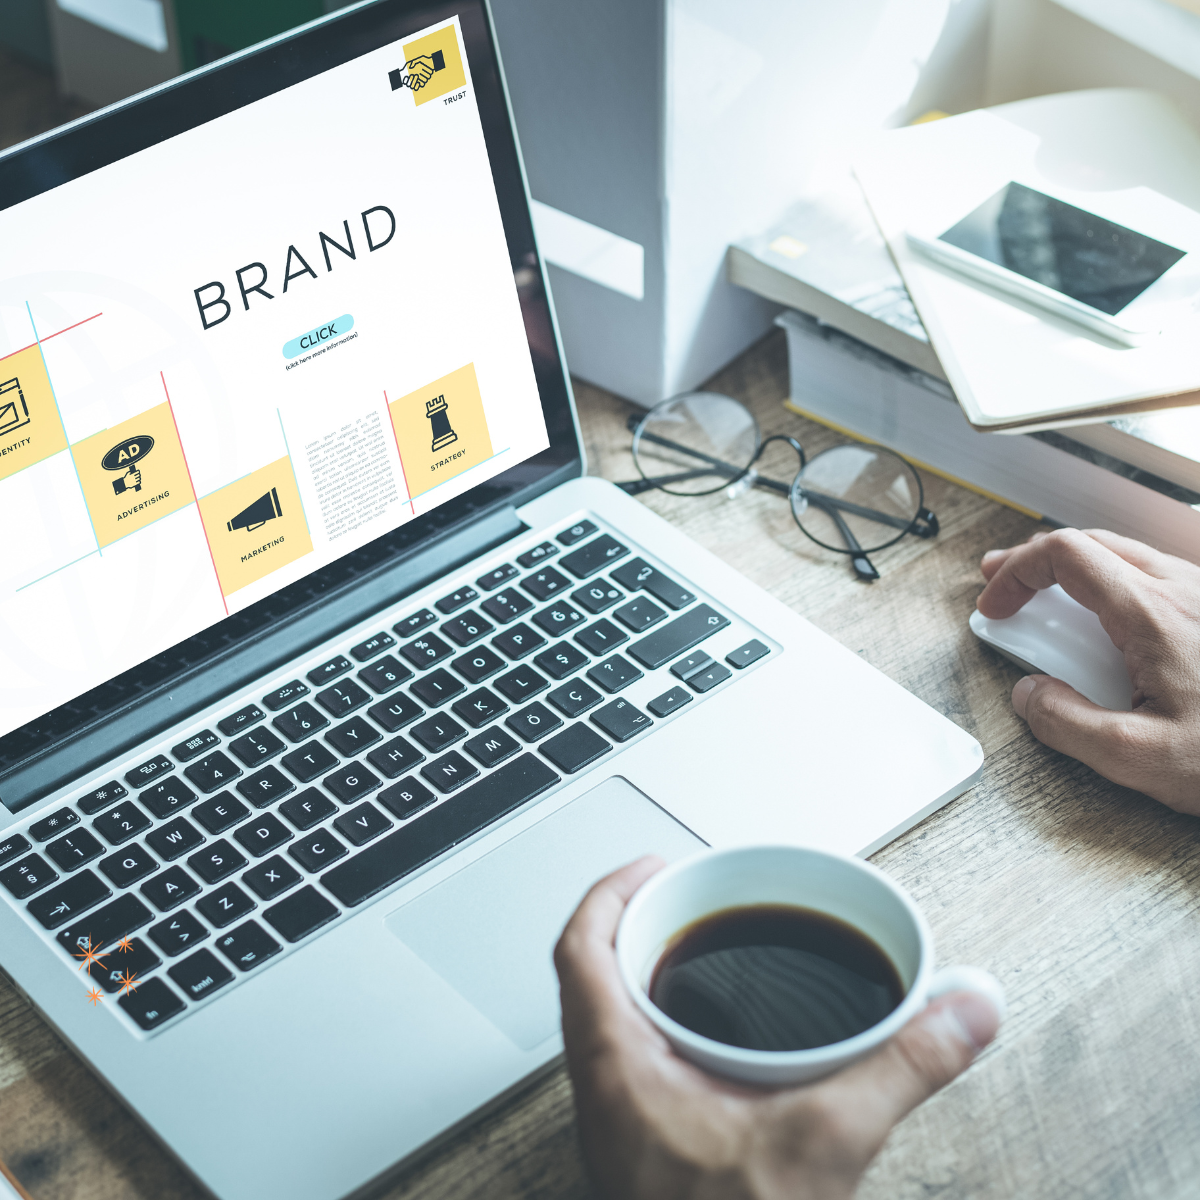 How to build a product brand